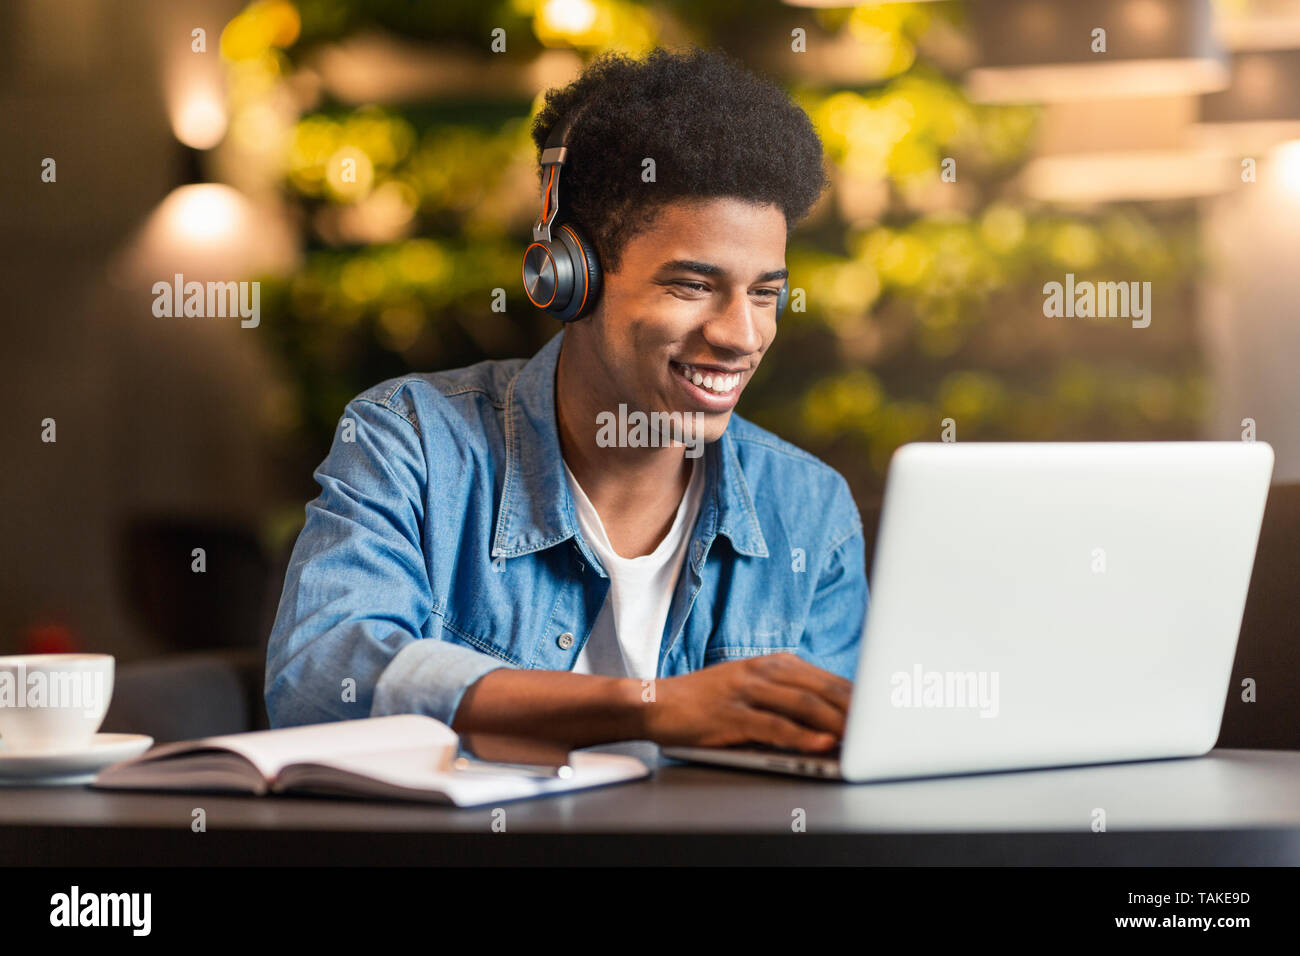 Black Teen Gamer Playing in Video Game on Laptop in Cafe Stock Photo